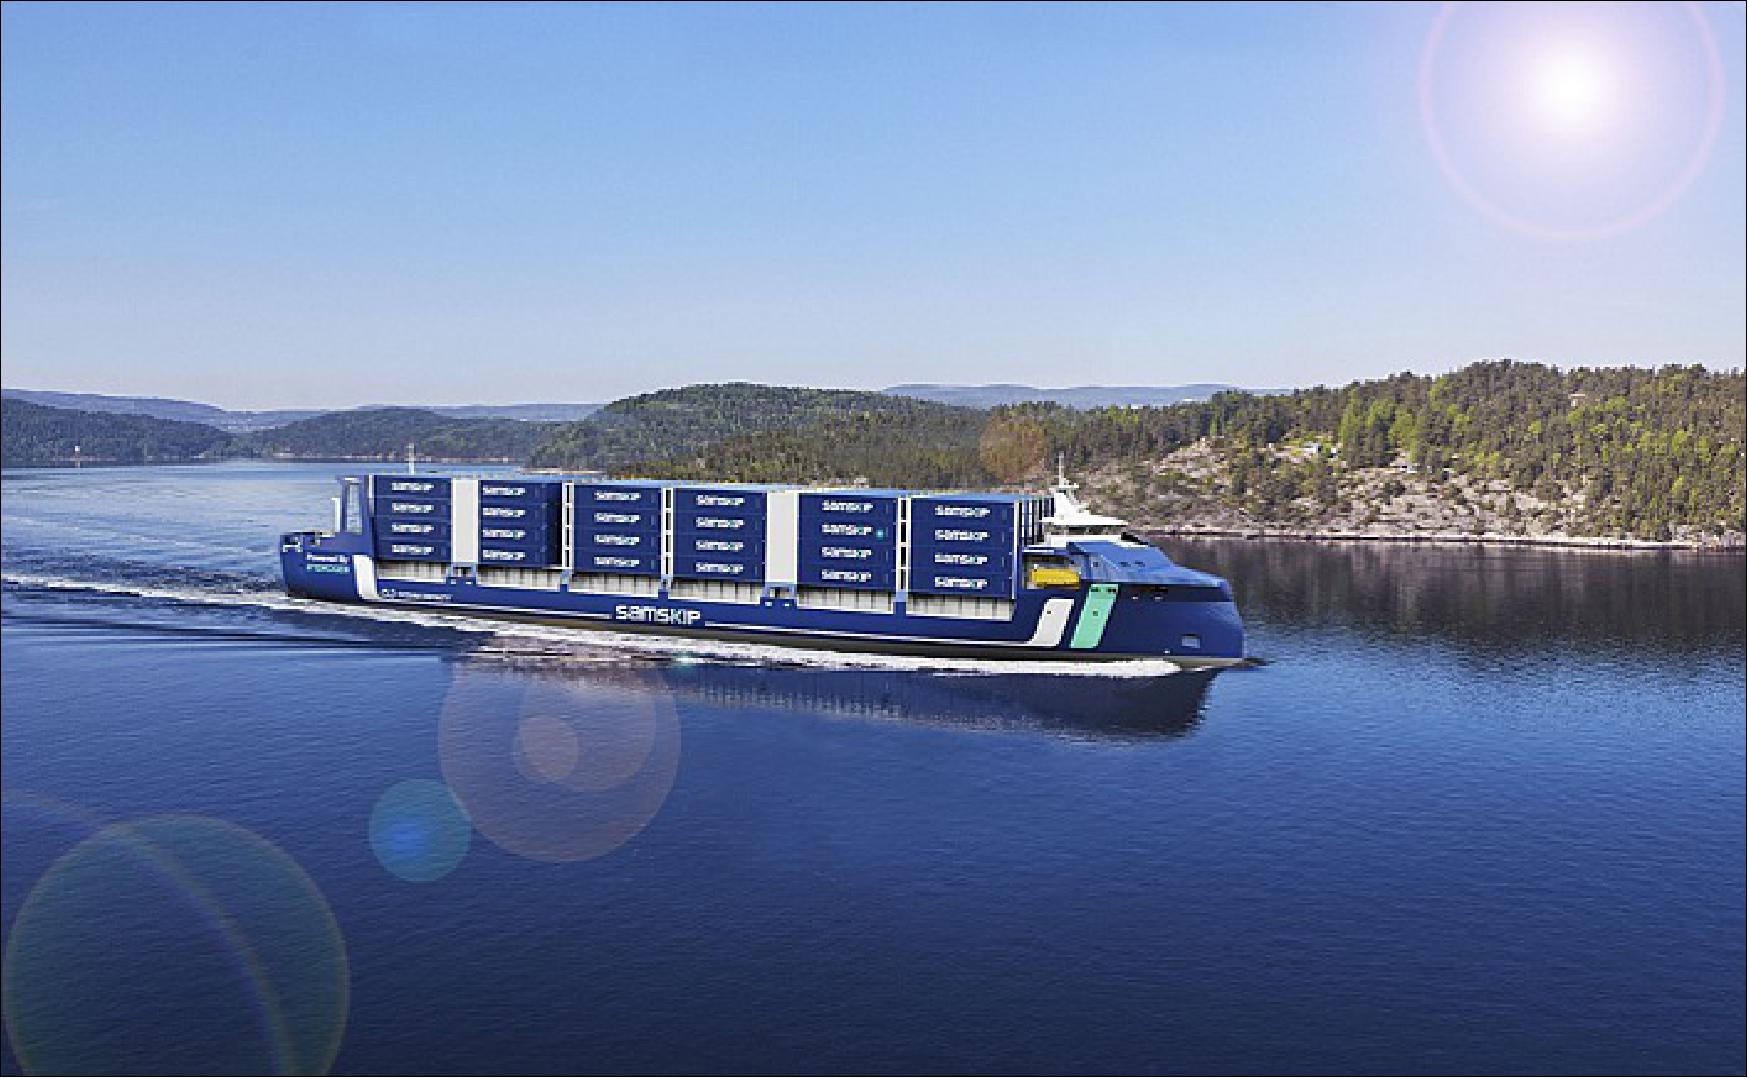 Figure 15: A project to build two hydrogen-powered, remotely controlled and autonomous-ready containerships for delivery by 2025 has received NOK 150 million (€15M) in funding from Norwegian state enterprise ENOVA (image credit: VPO Global)